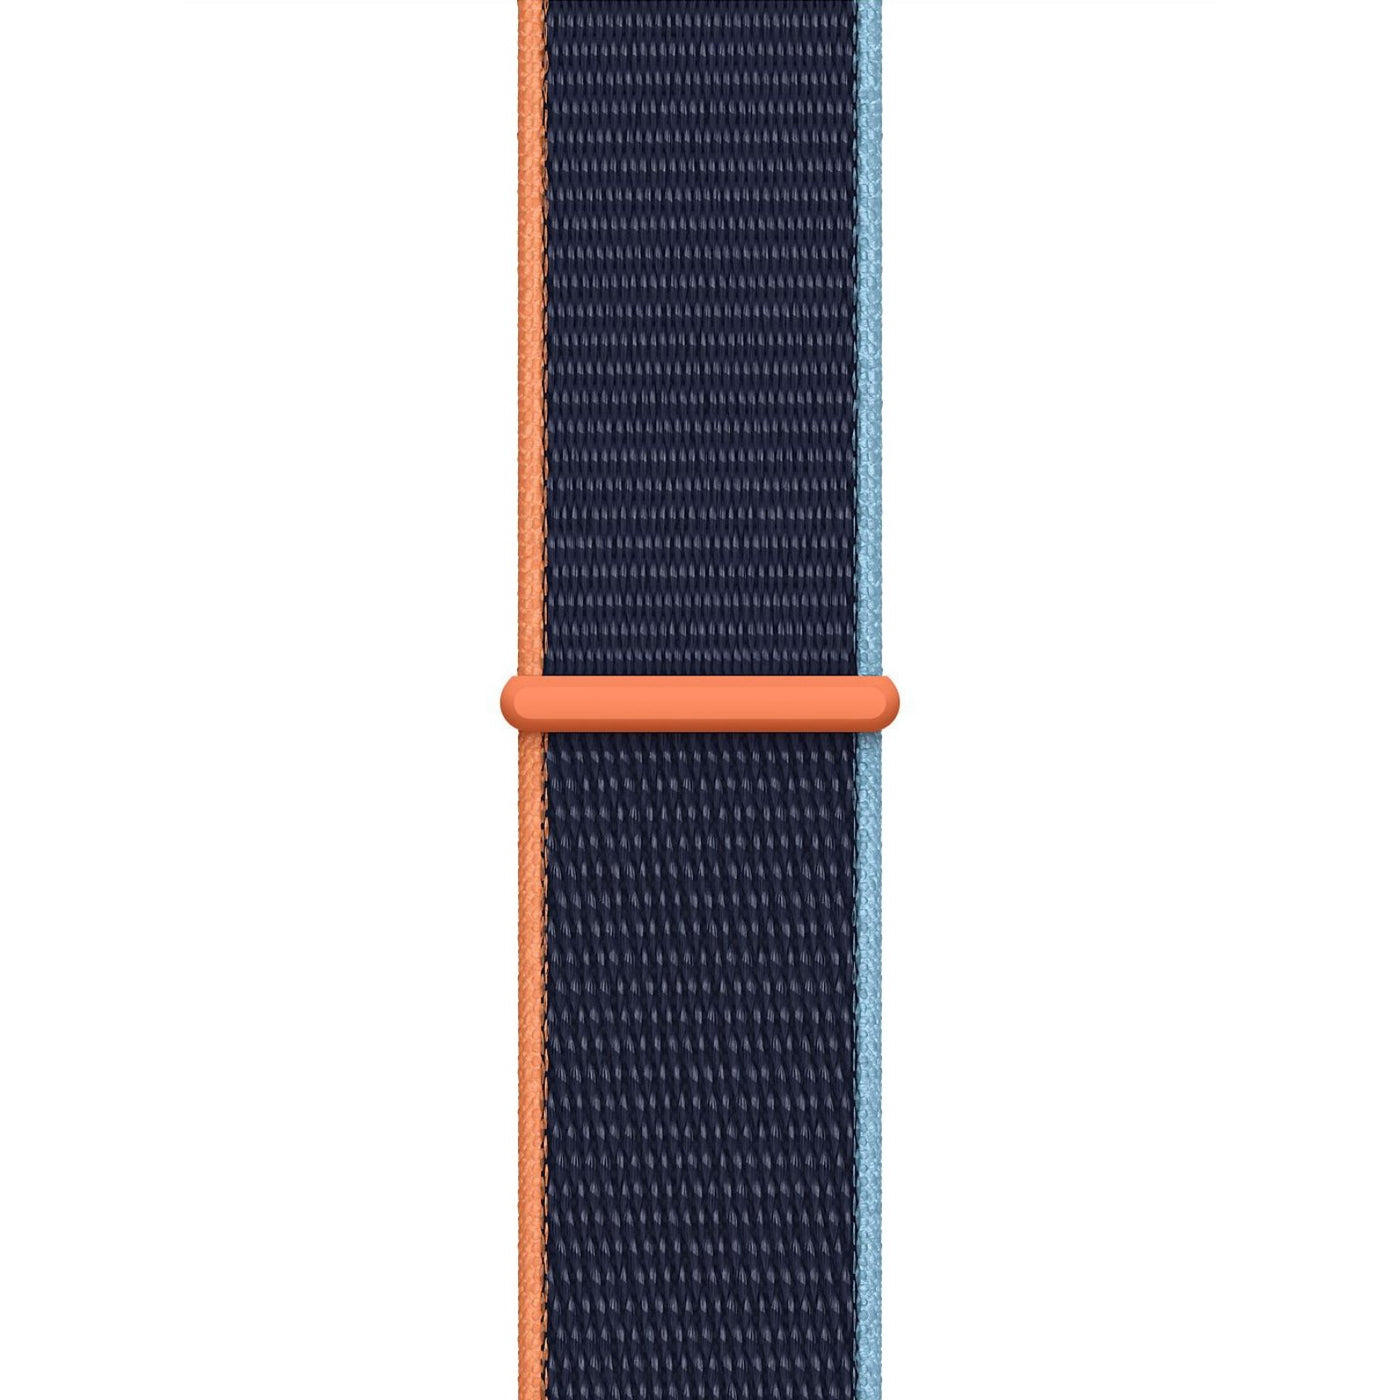 ALK Classic Nylon Band for Apple Watch in Deep Navy - Alk Designs